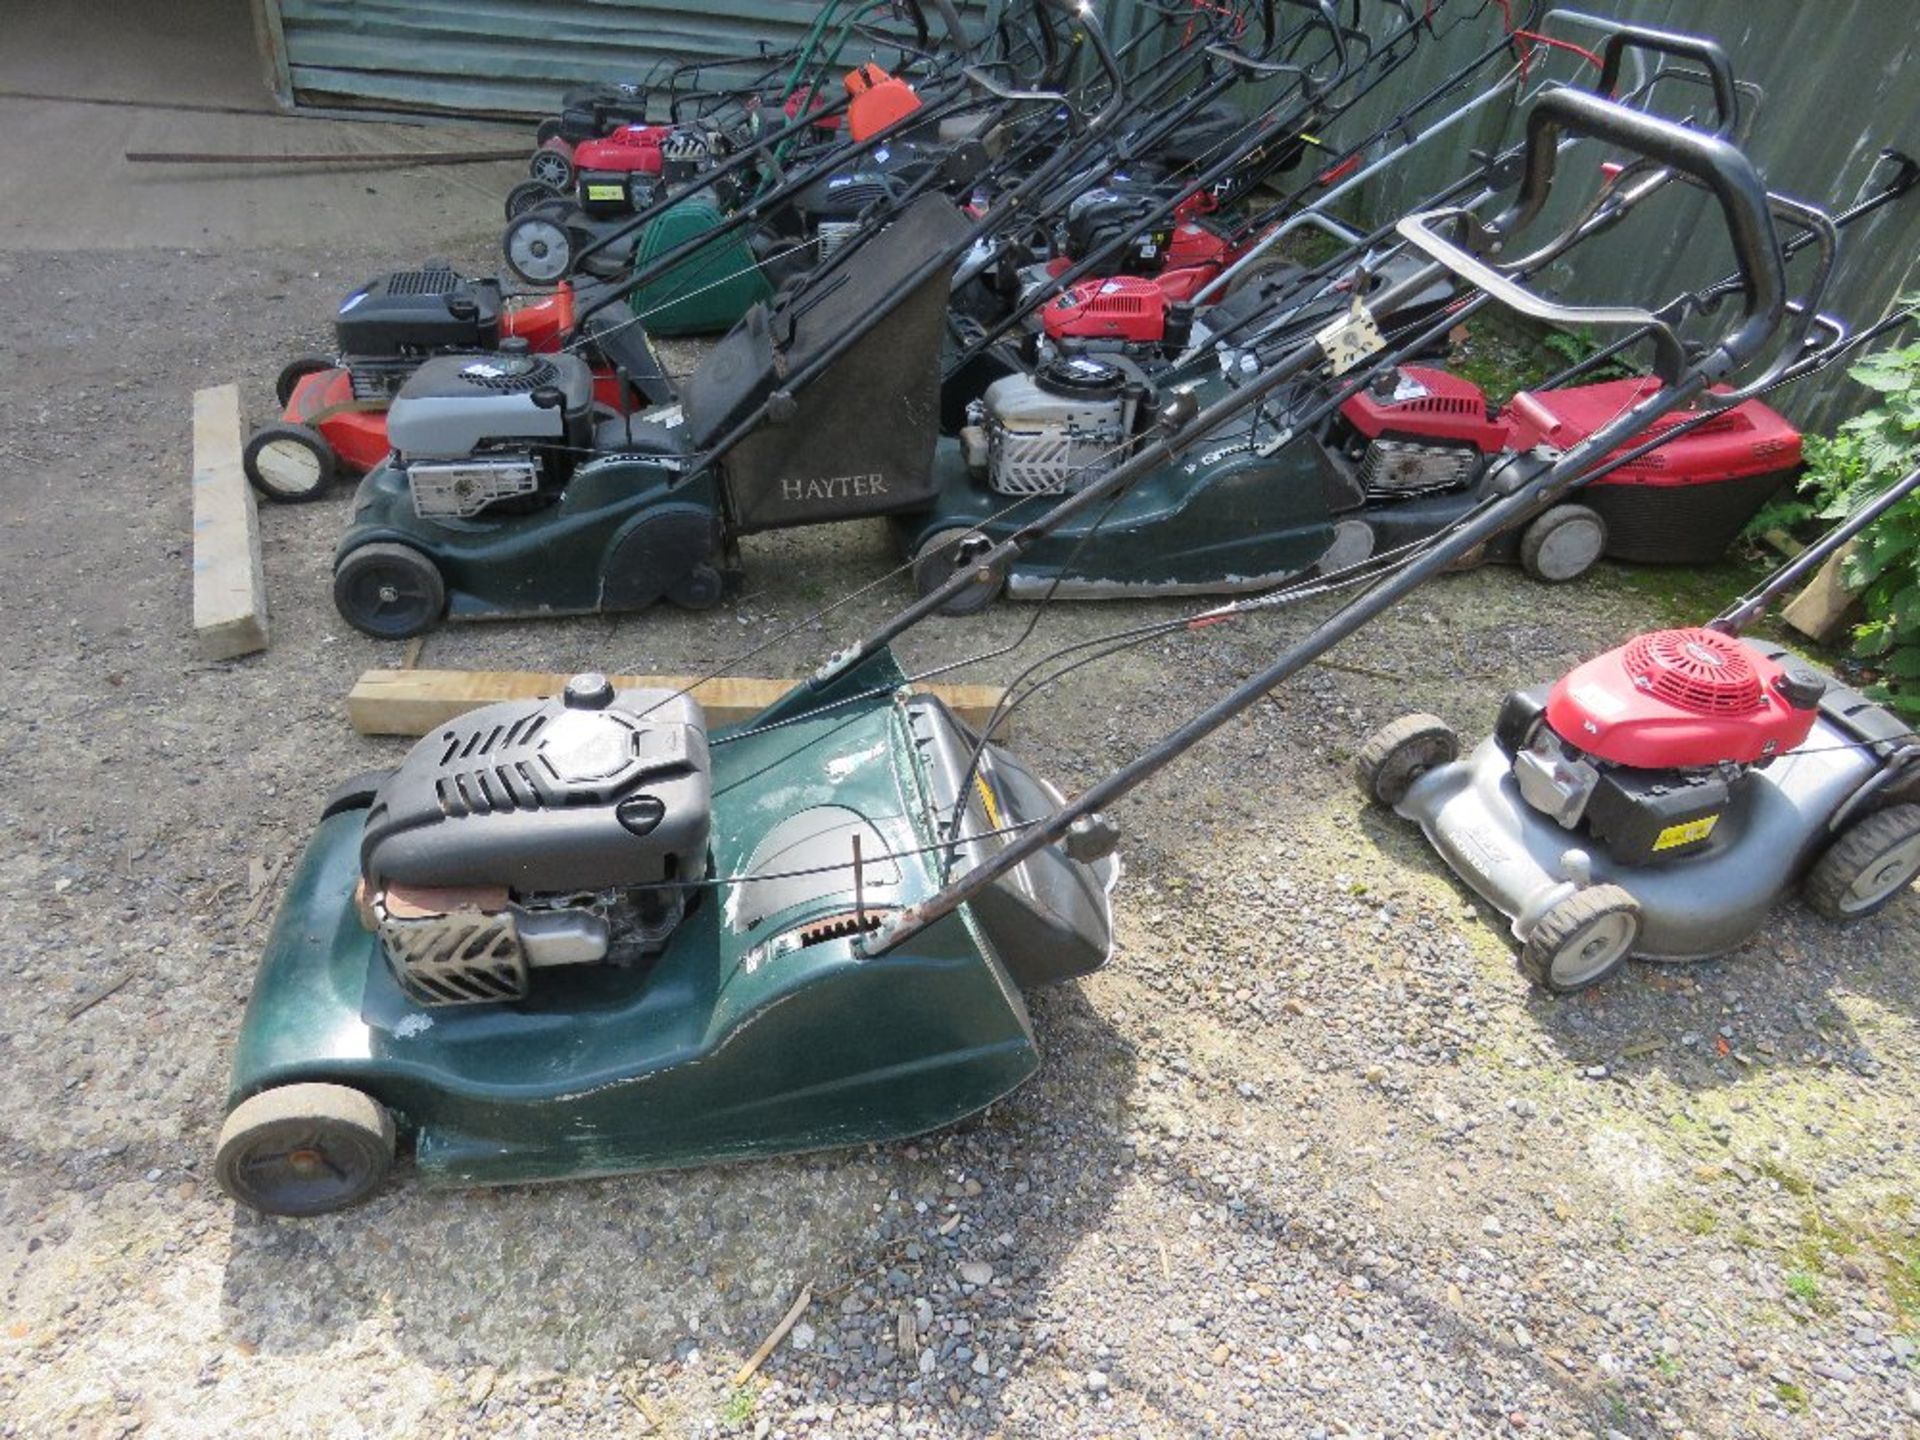 HAYTER HARRIER 56 PETROL ENGINED MOWER WITH REAR ROLLER AND NO COLLECTOR. ....THIS LOT IS SOLD UNDER